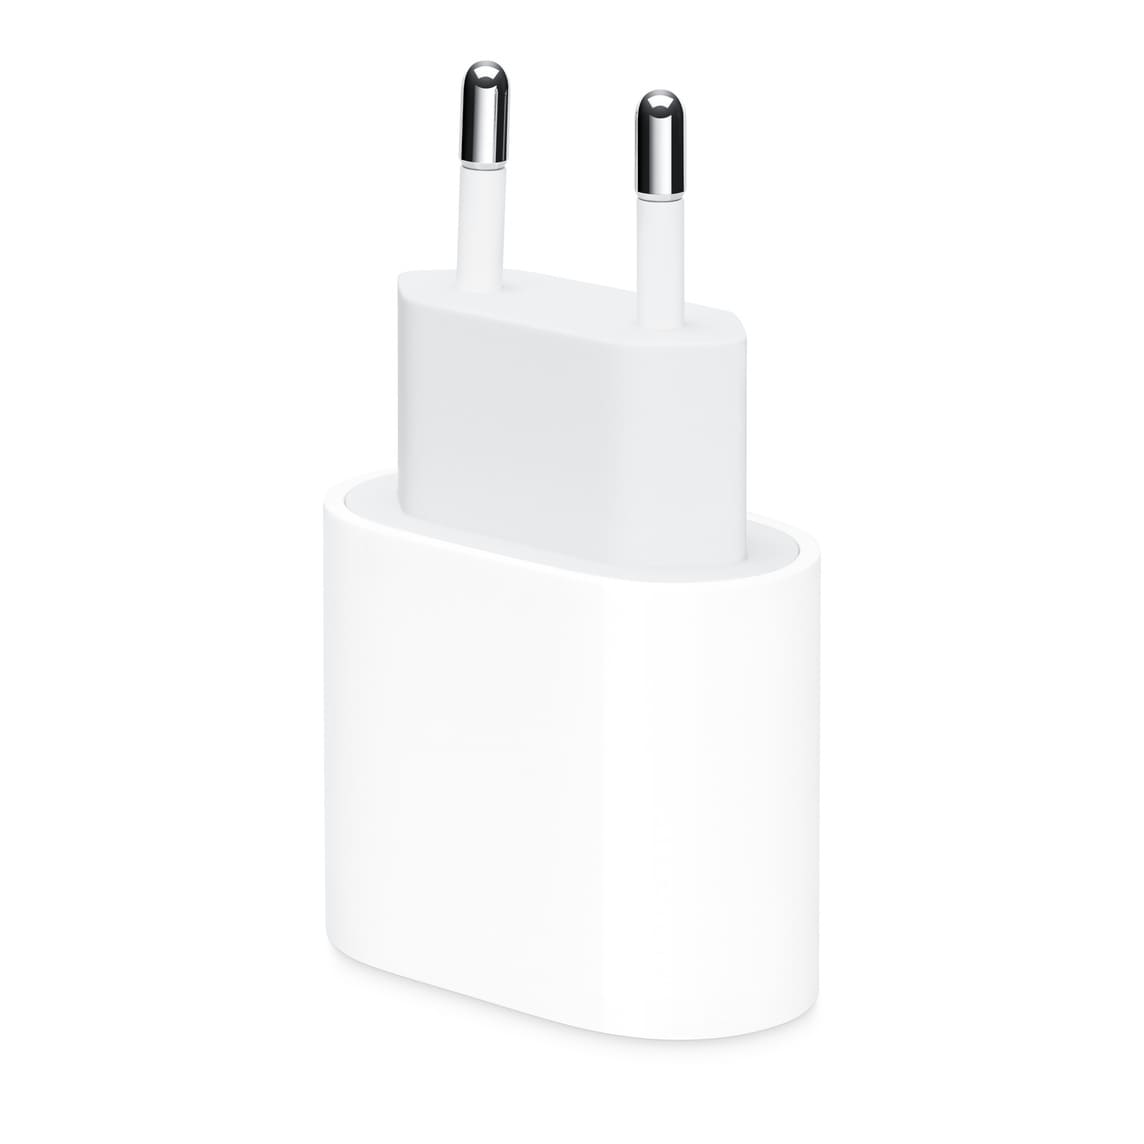 USB-C 20 W power adapter. Compatible with any device with USB-C connection.
